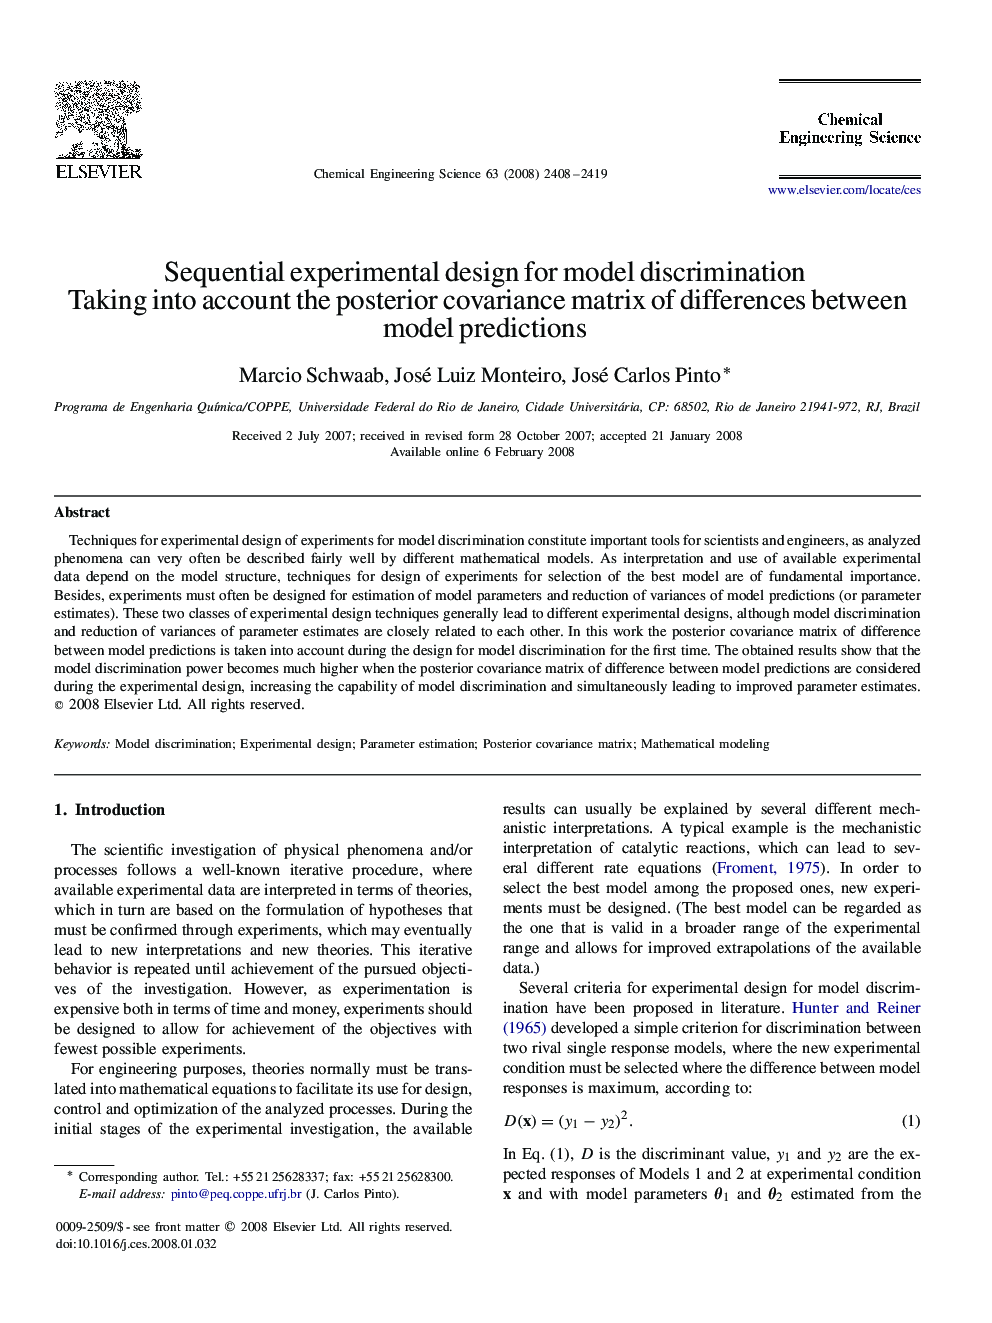 Sequential experimental design for model discrimination: Taking into account the posterior covariance matrix of differences between model predictions